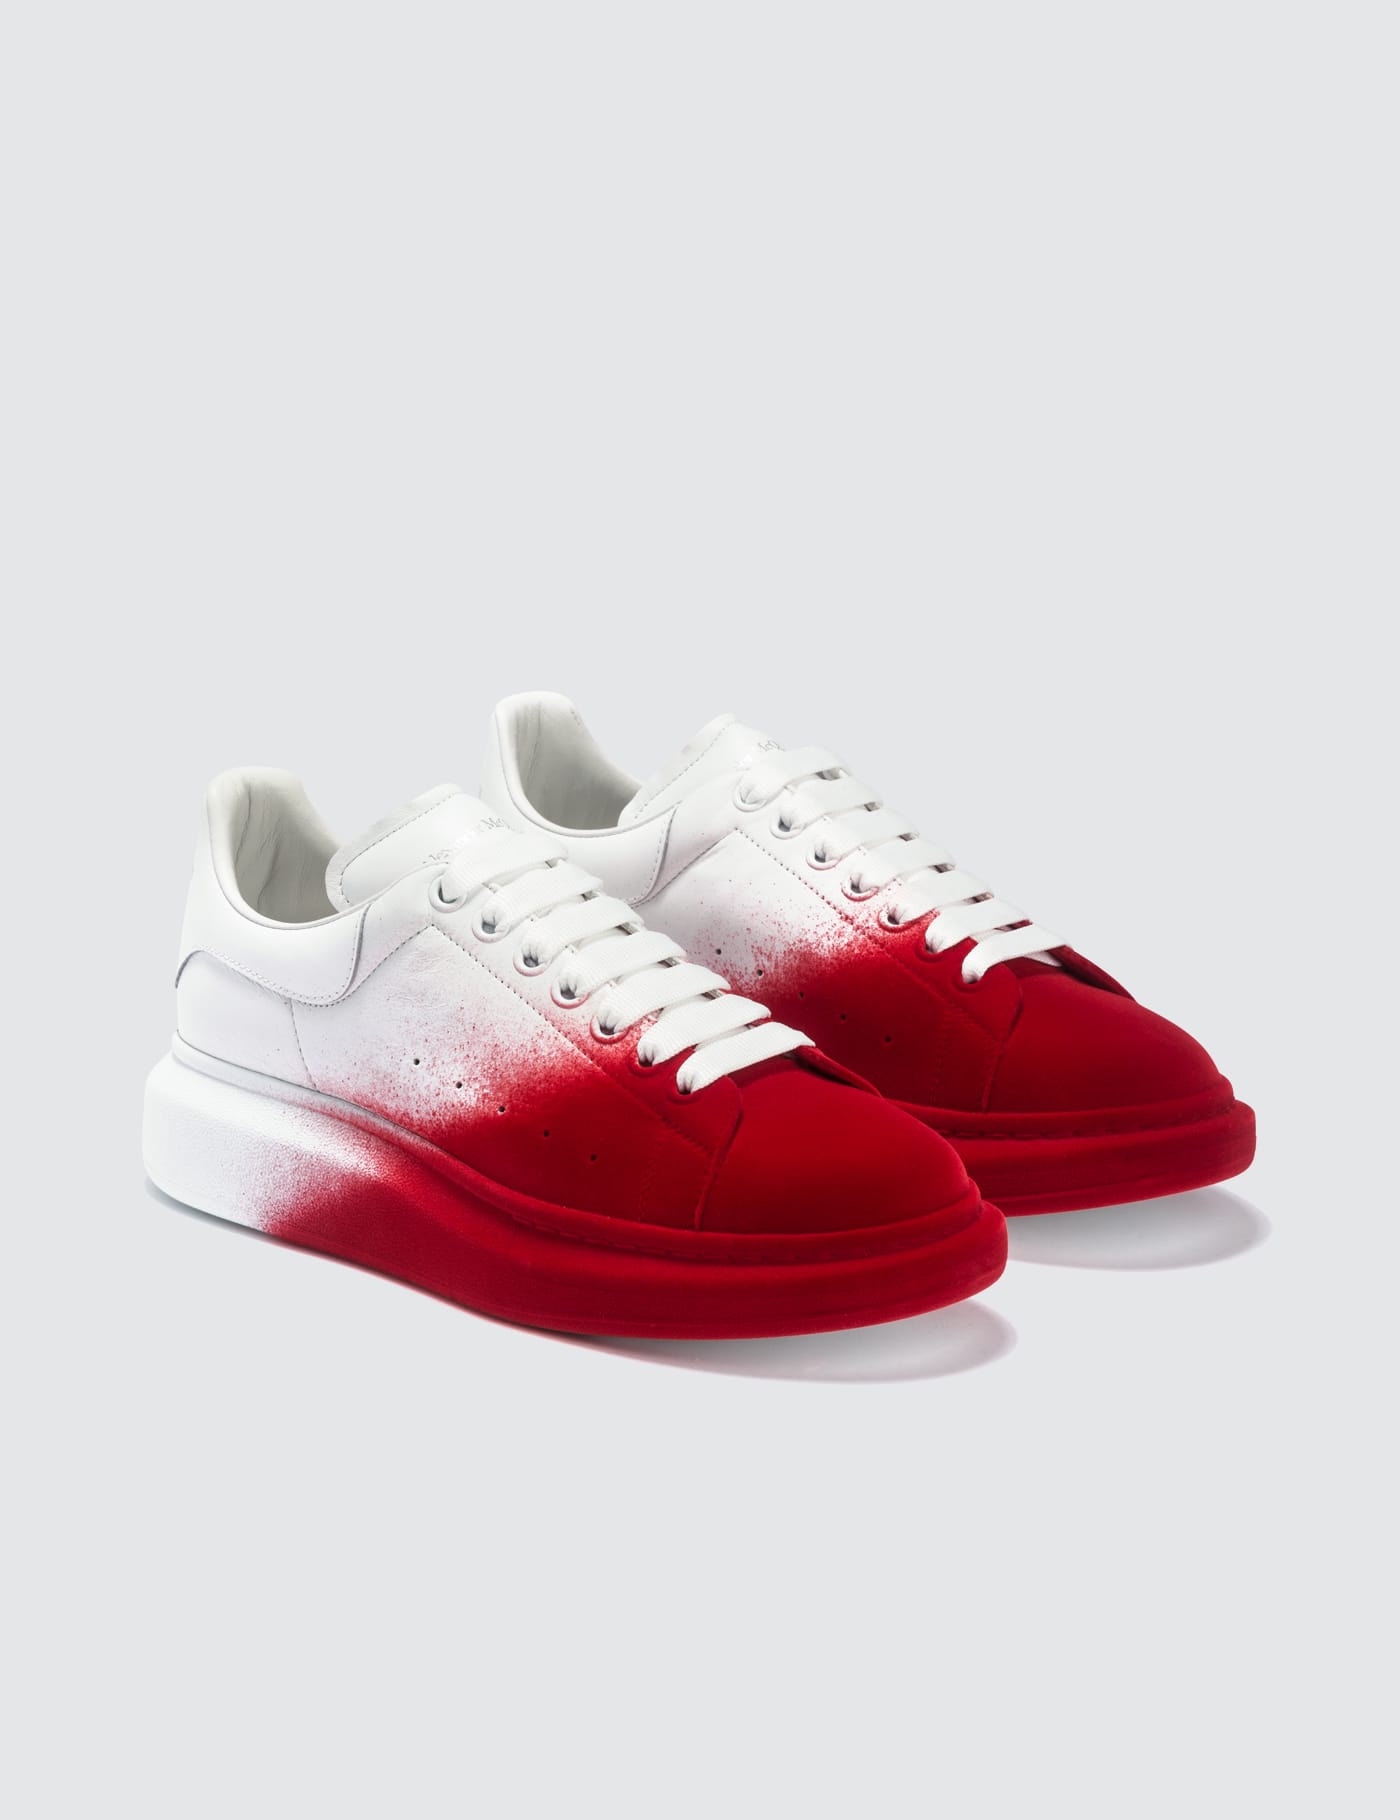 white and red mcqueens